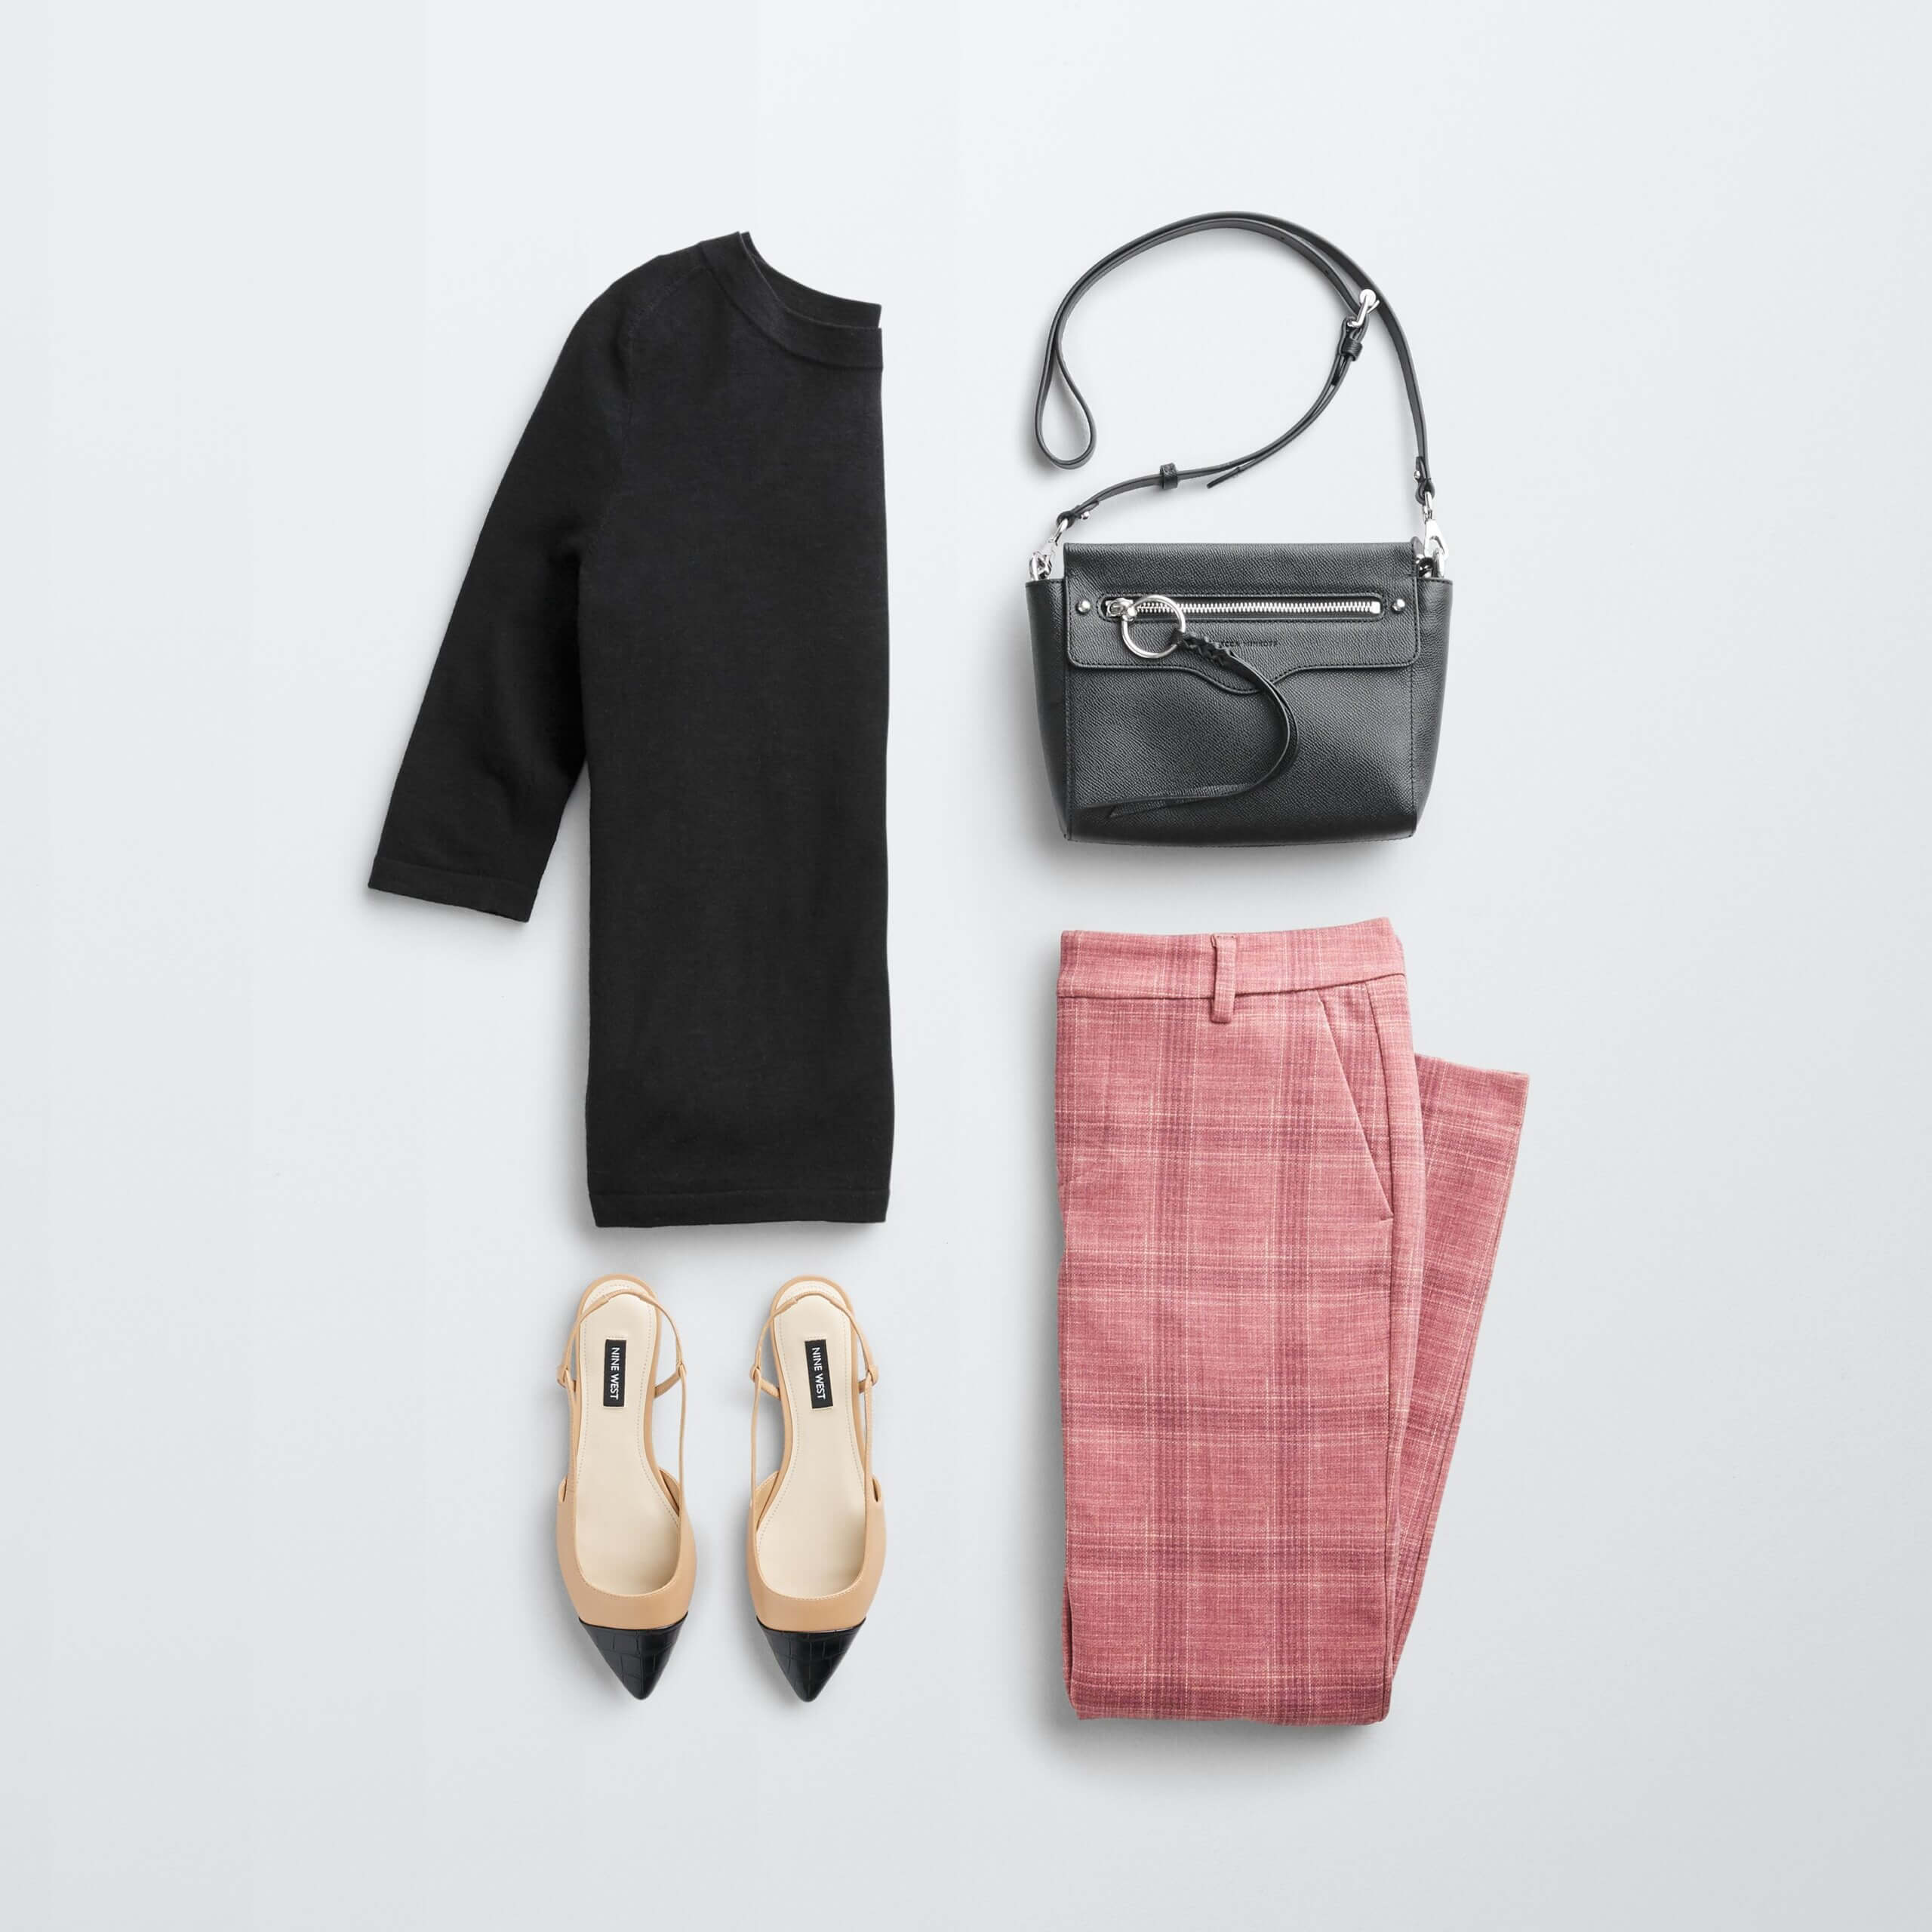 Stitch Fix Women’s outfit laydown featuring pink windowpane patterned pants, black tunic, slingbacks and black bag.